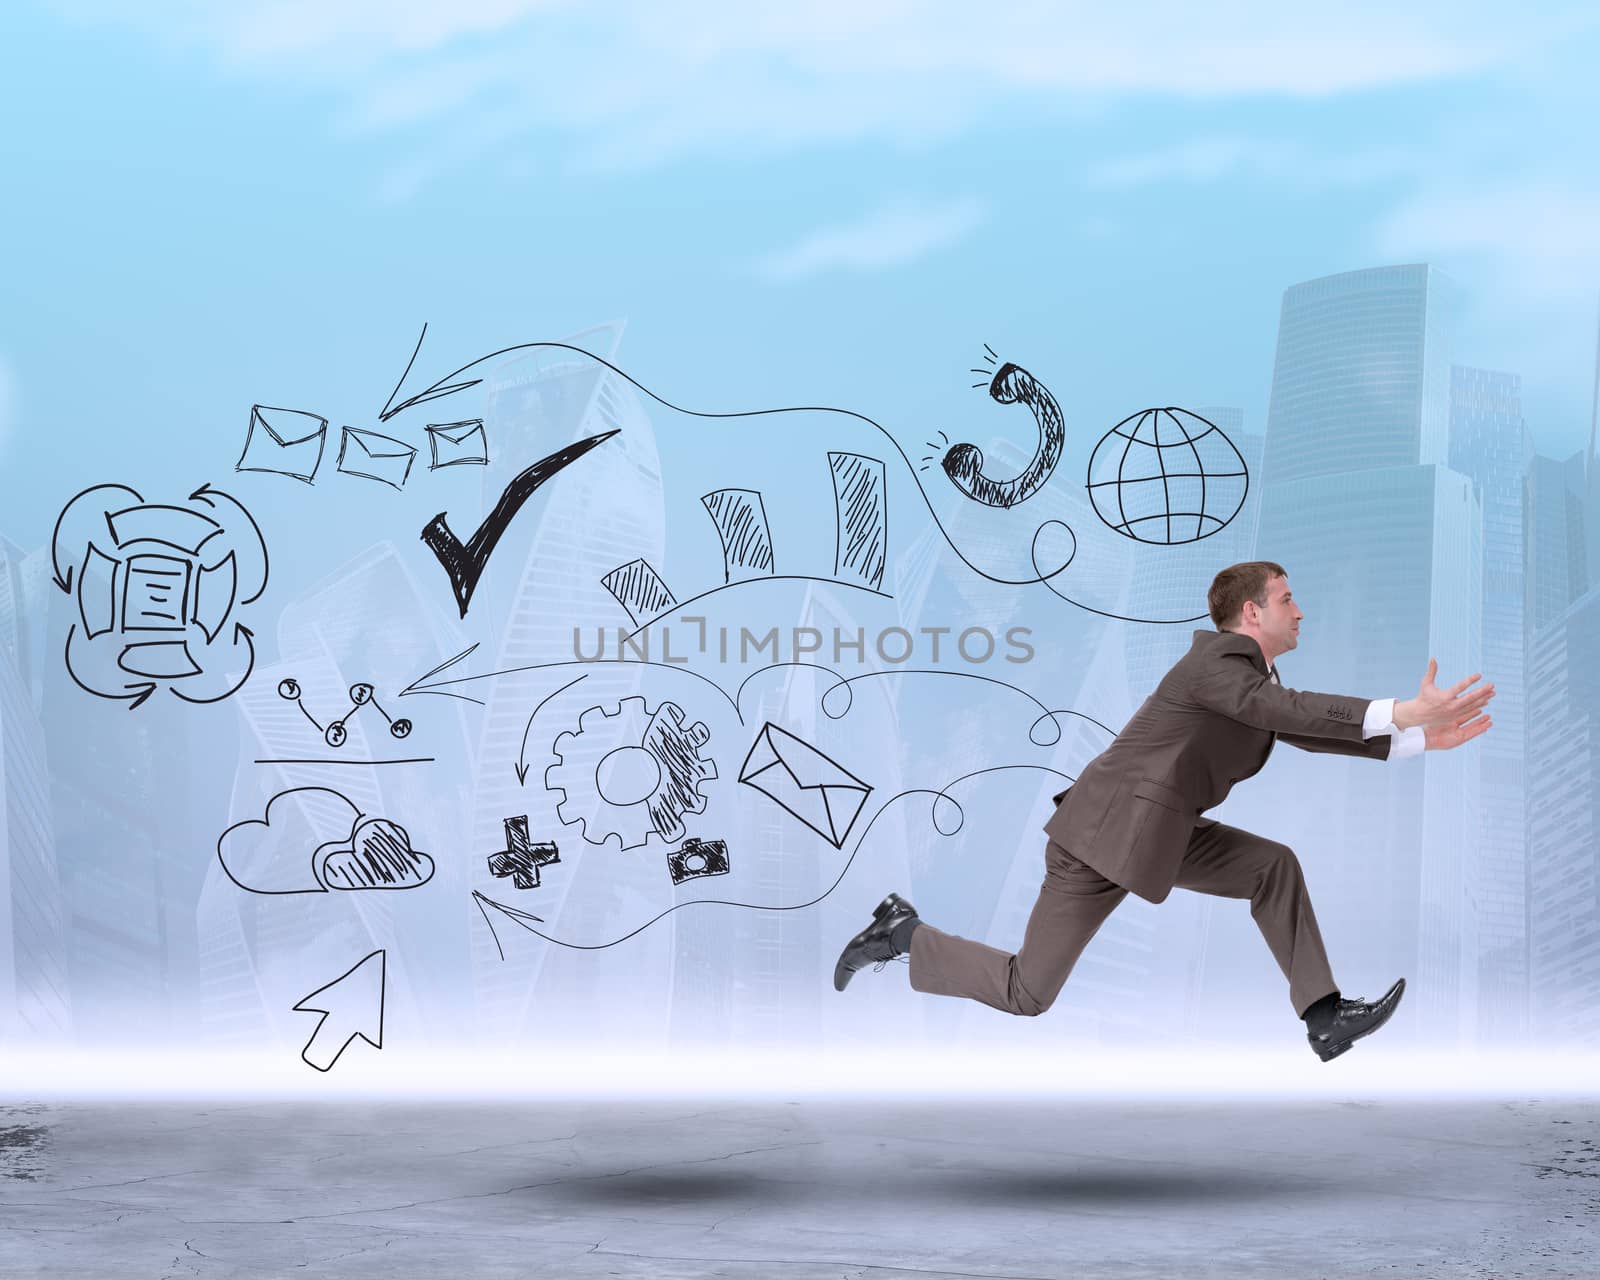 Businessman running fast on abstract background with symbols